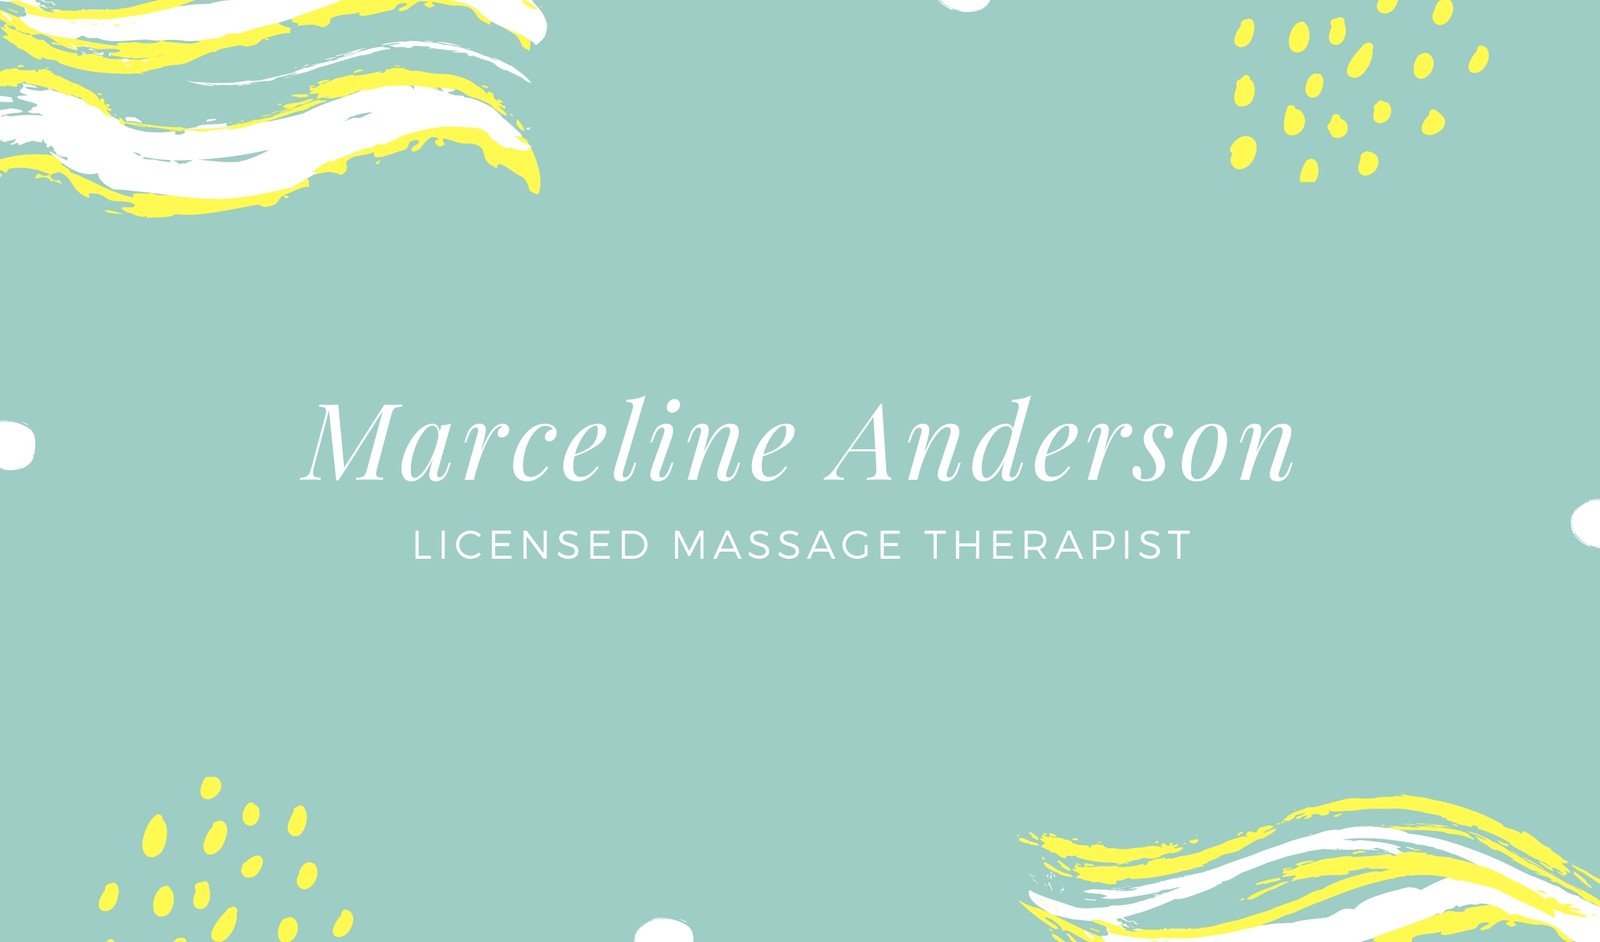 Free printable massage therapist business card templates  Canva With Massage Therapy Business Card Templates